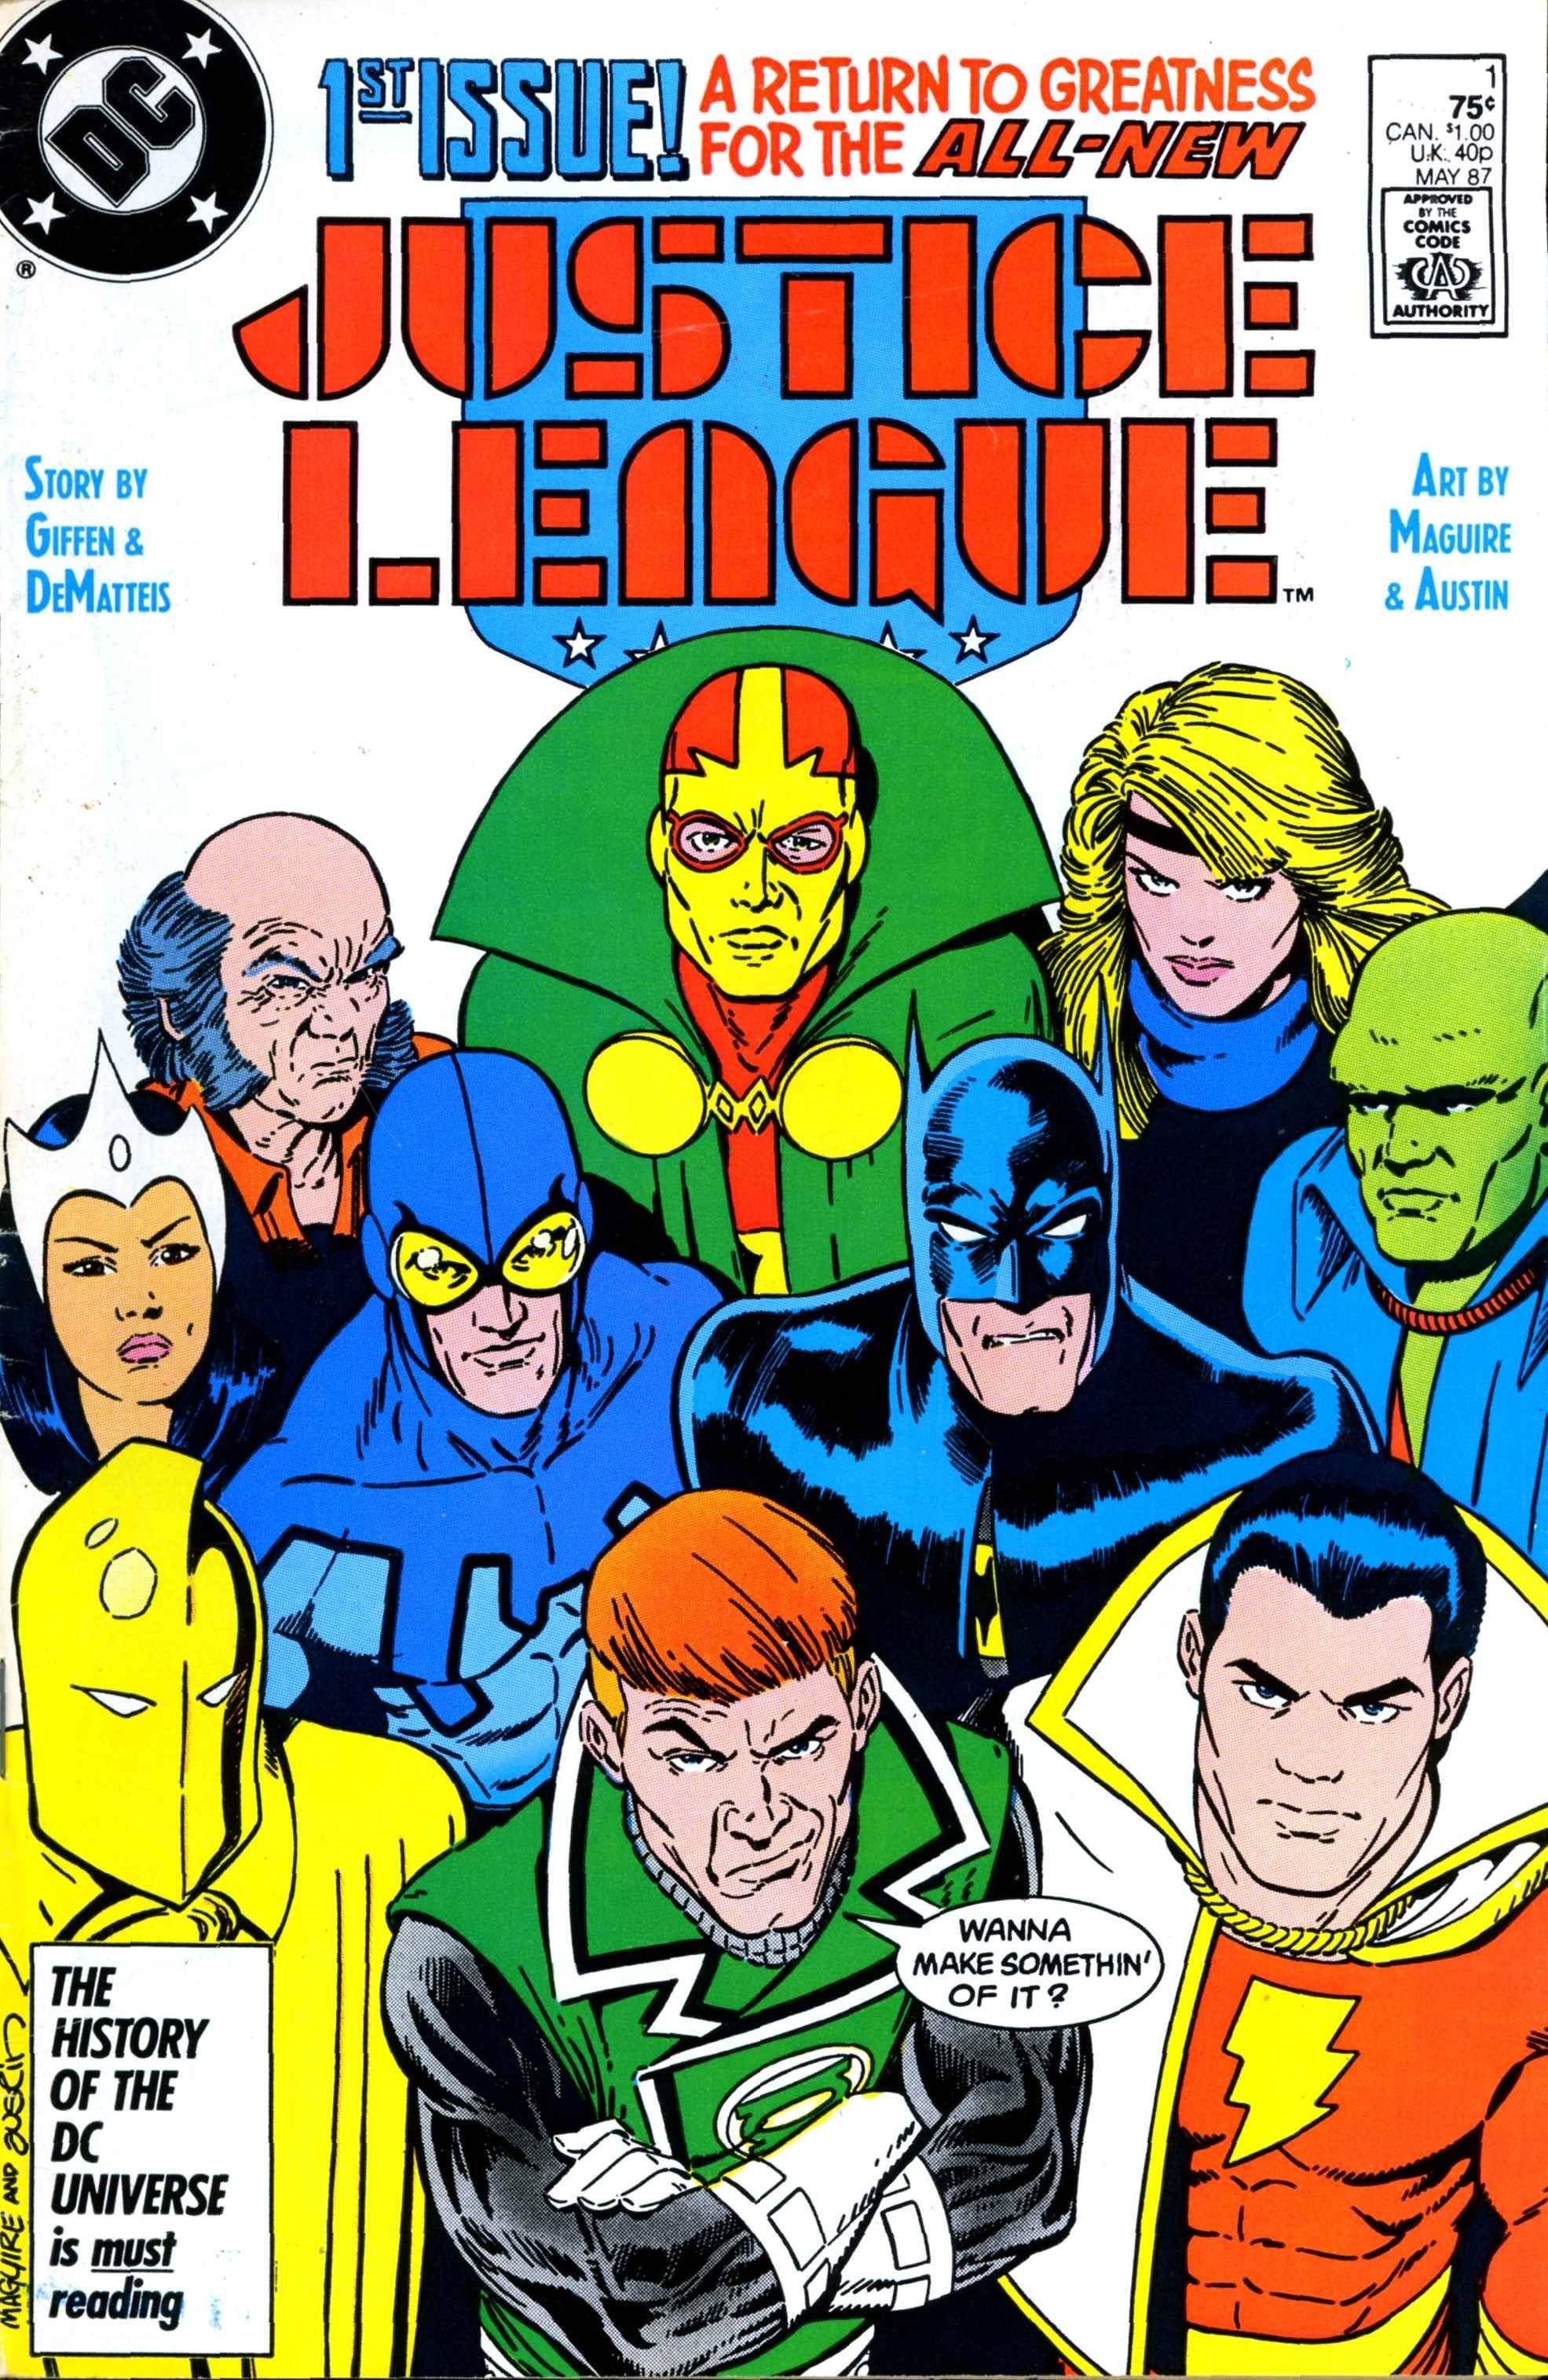 Justice League #1 cover May 1987